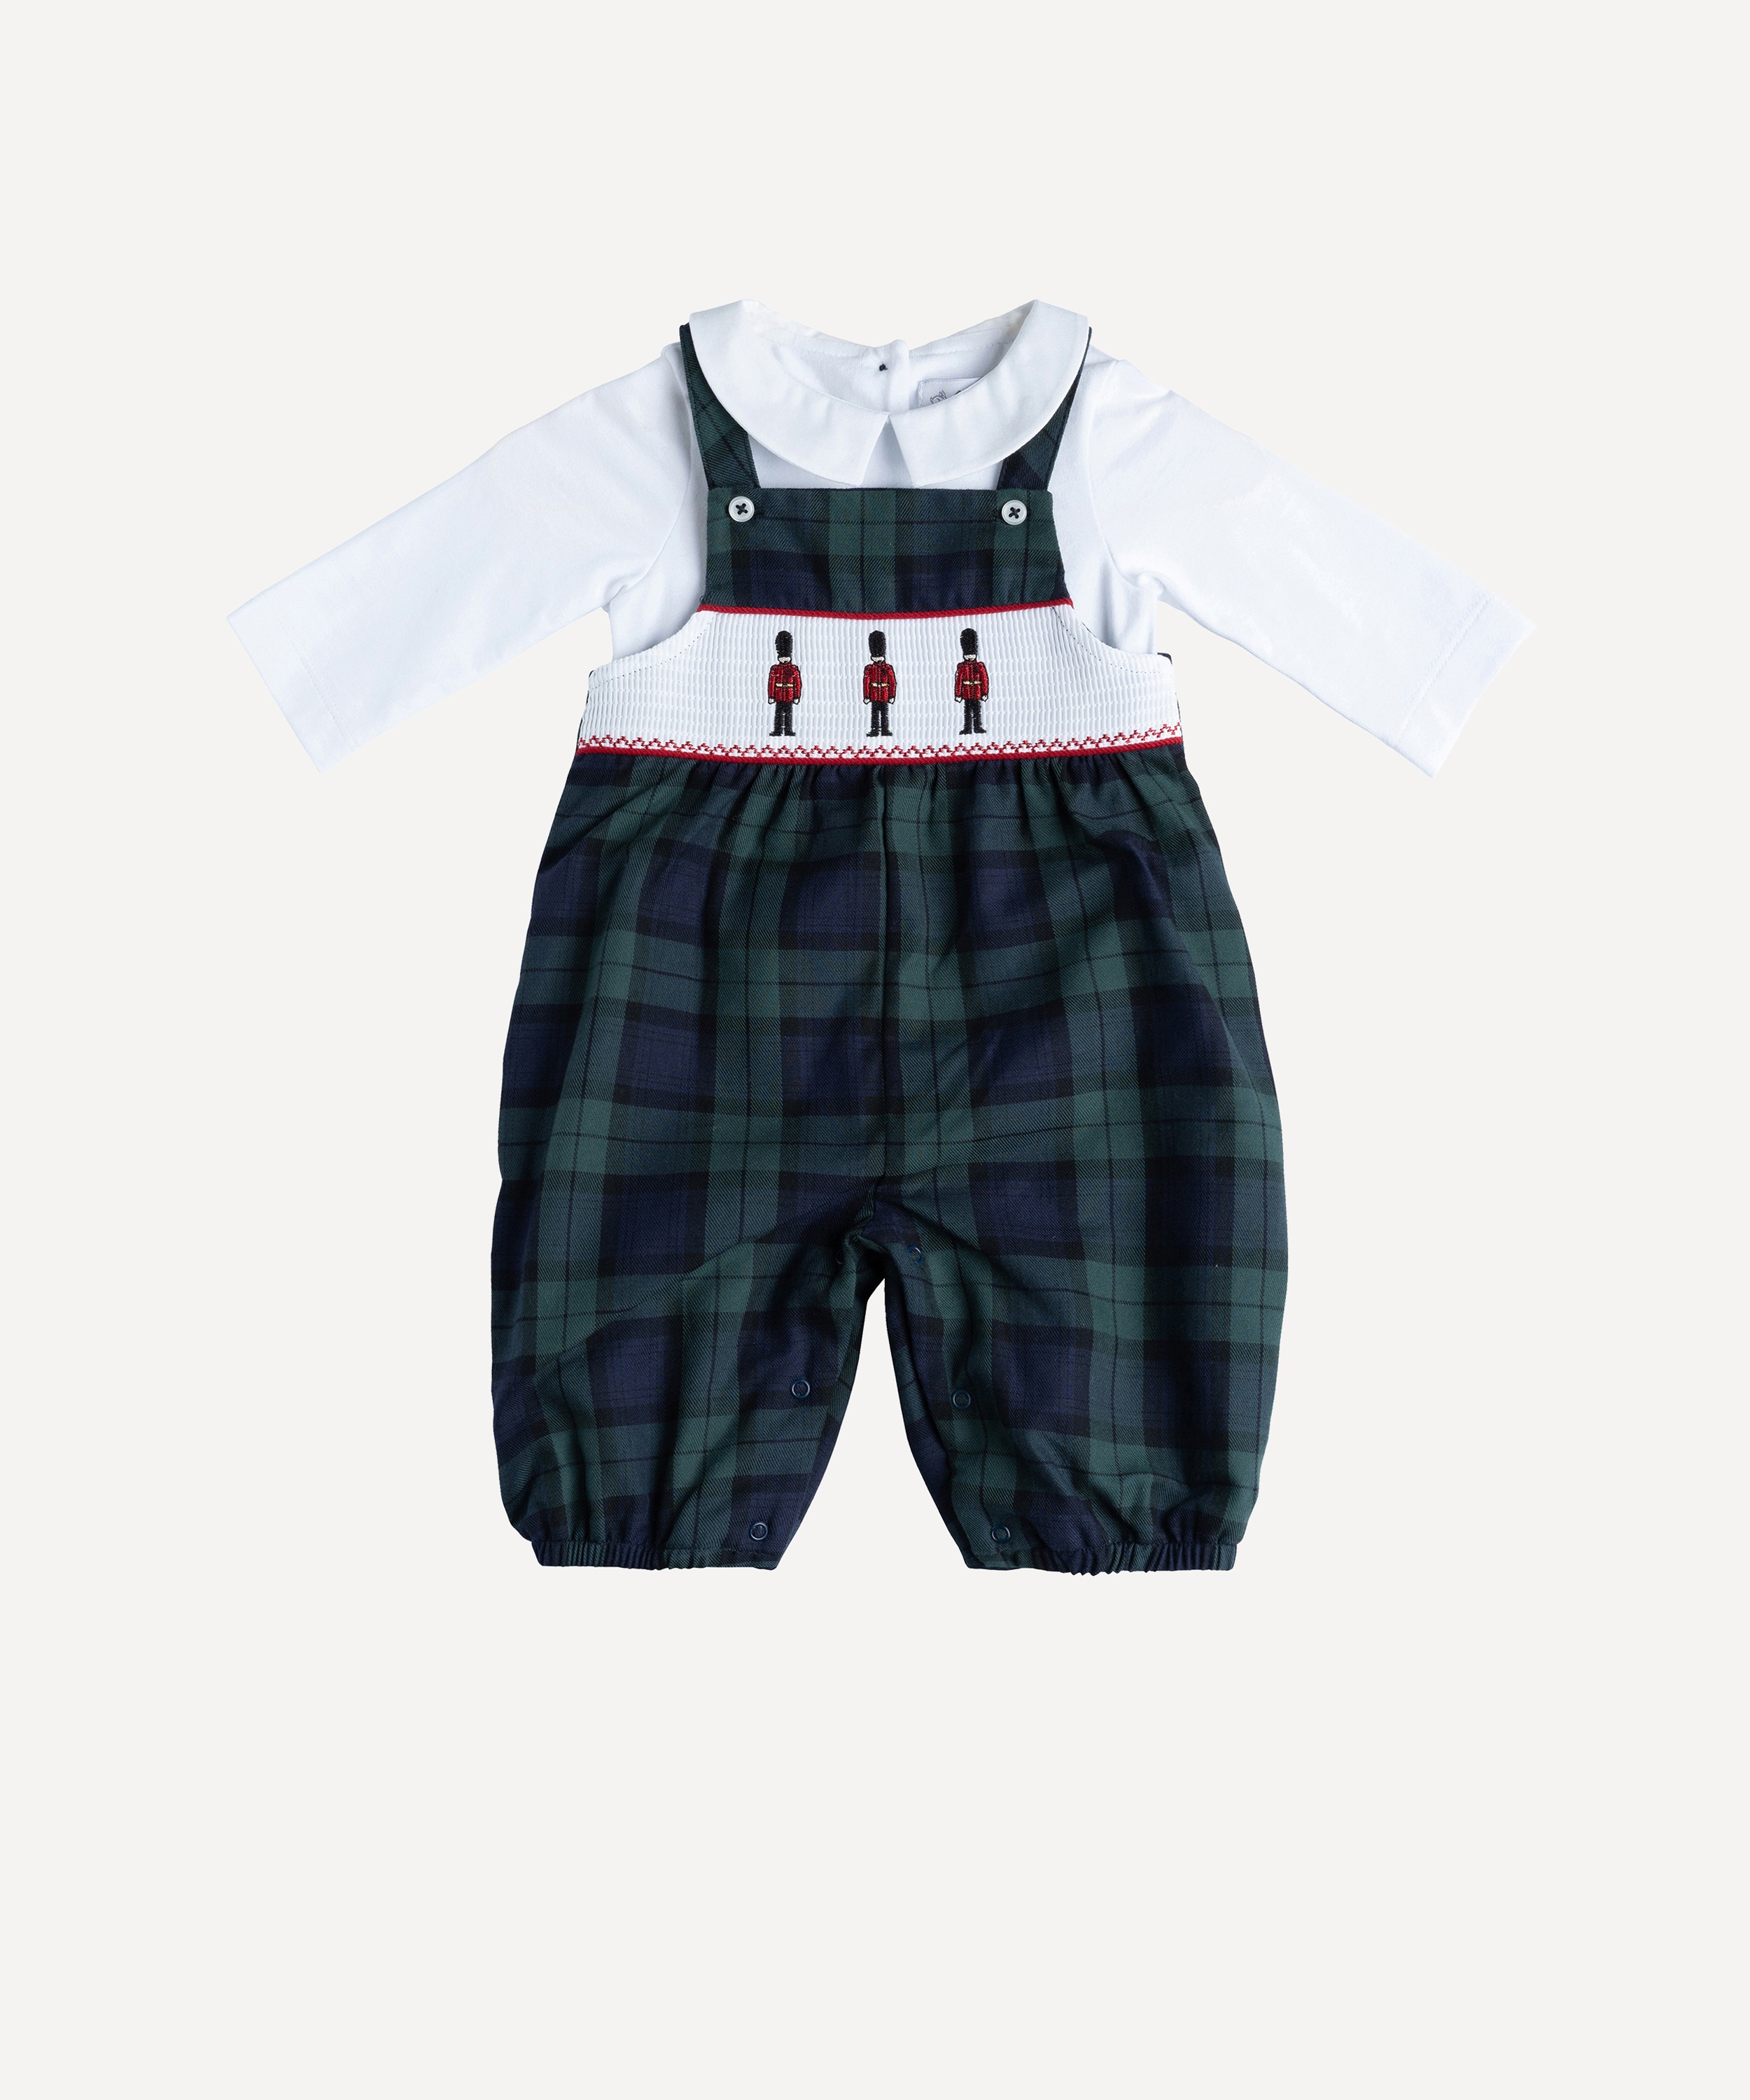 Trotters - My First Christmas Dungarees 0-9 Months image number 0